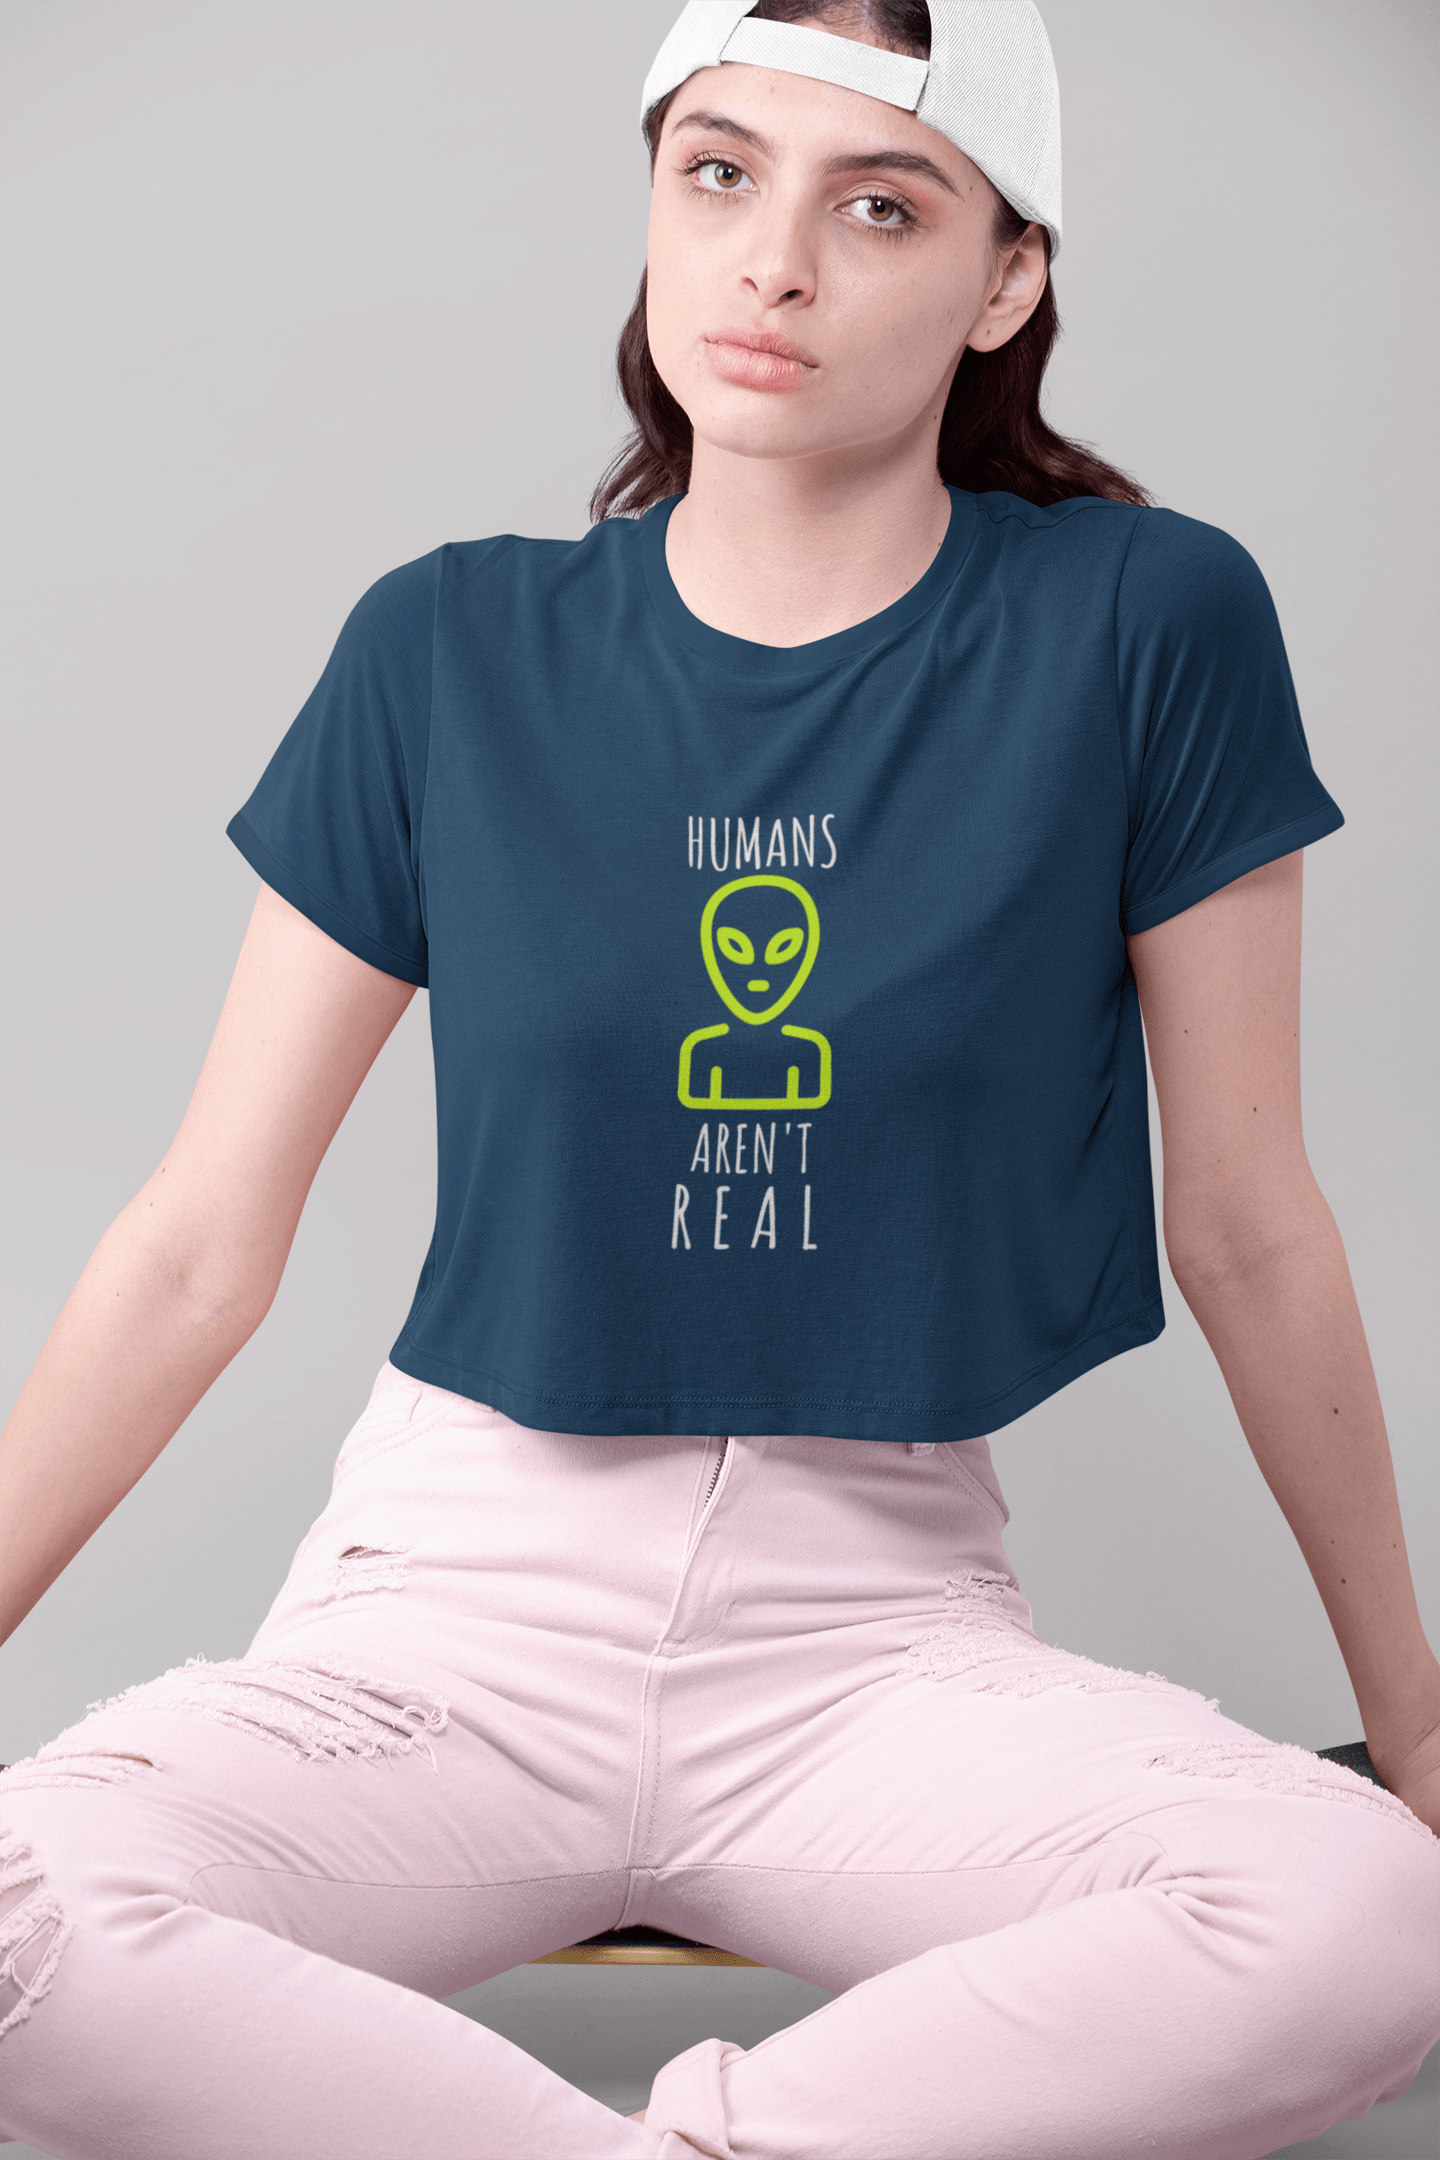 " HUMANS ARE NOT REAL " - HALF-SLEEVE CROP TOPS NAVY BLUE